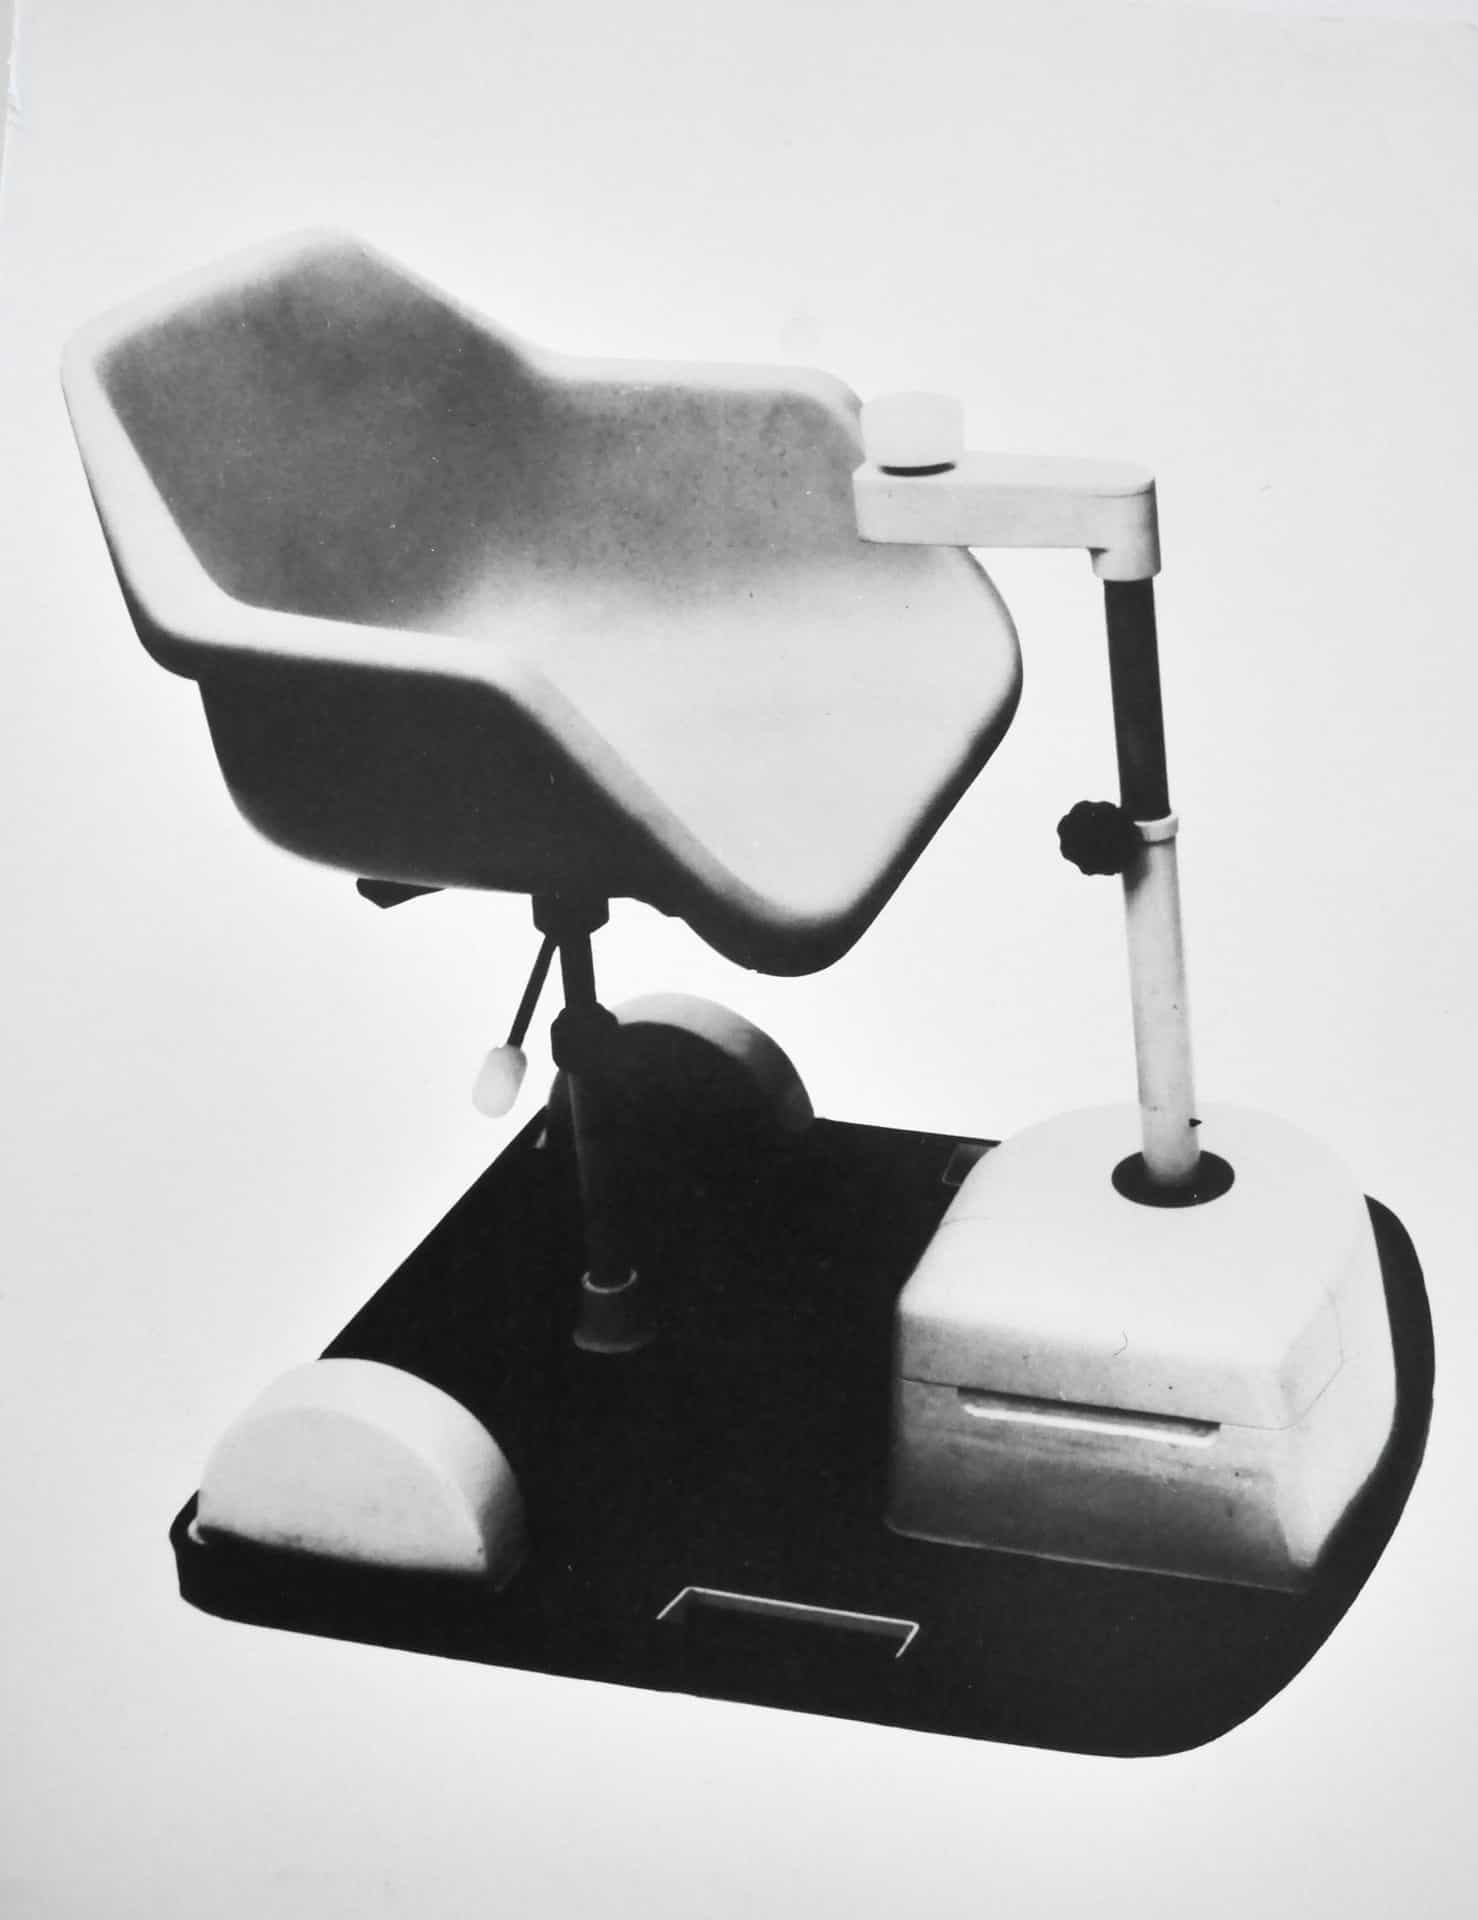 The mobile chair George designed for a disabled friend of Lord Snowdon.